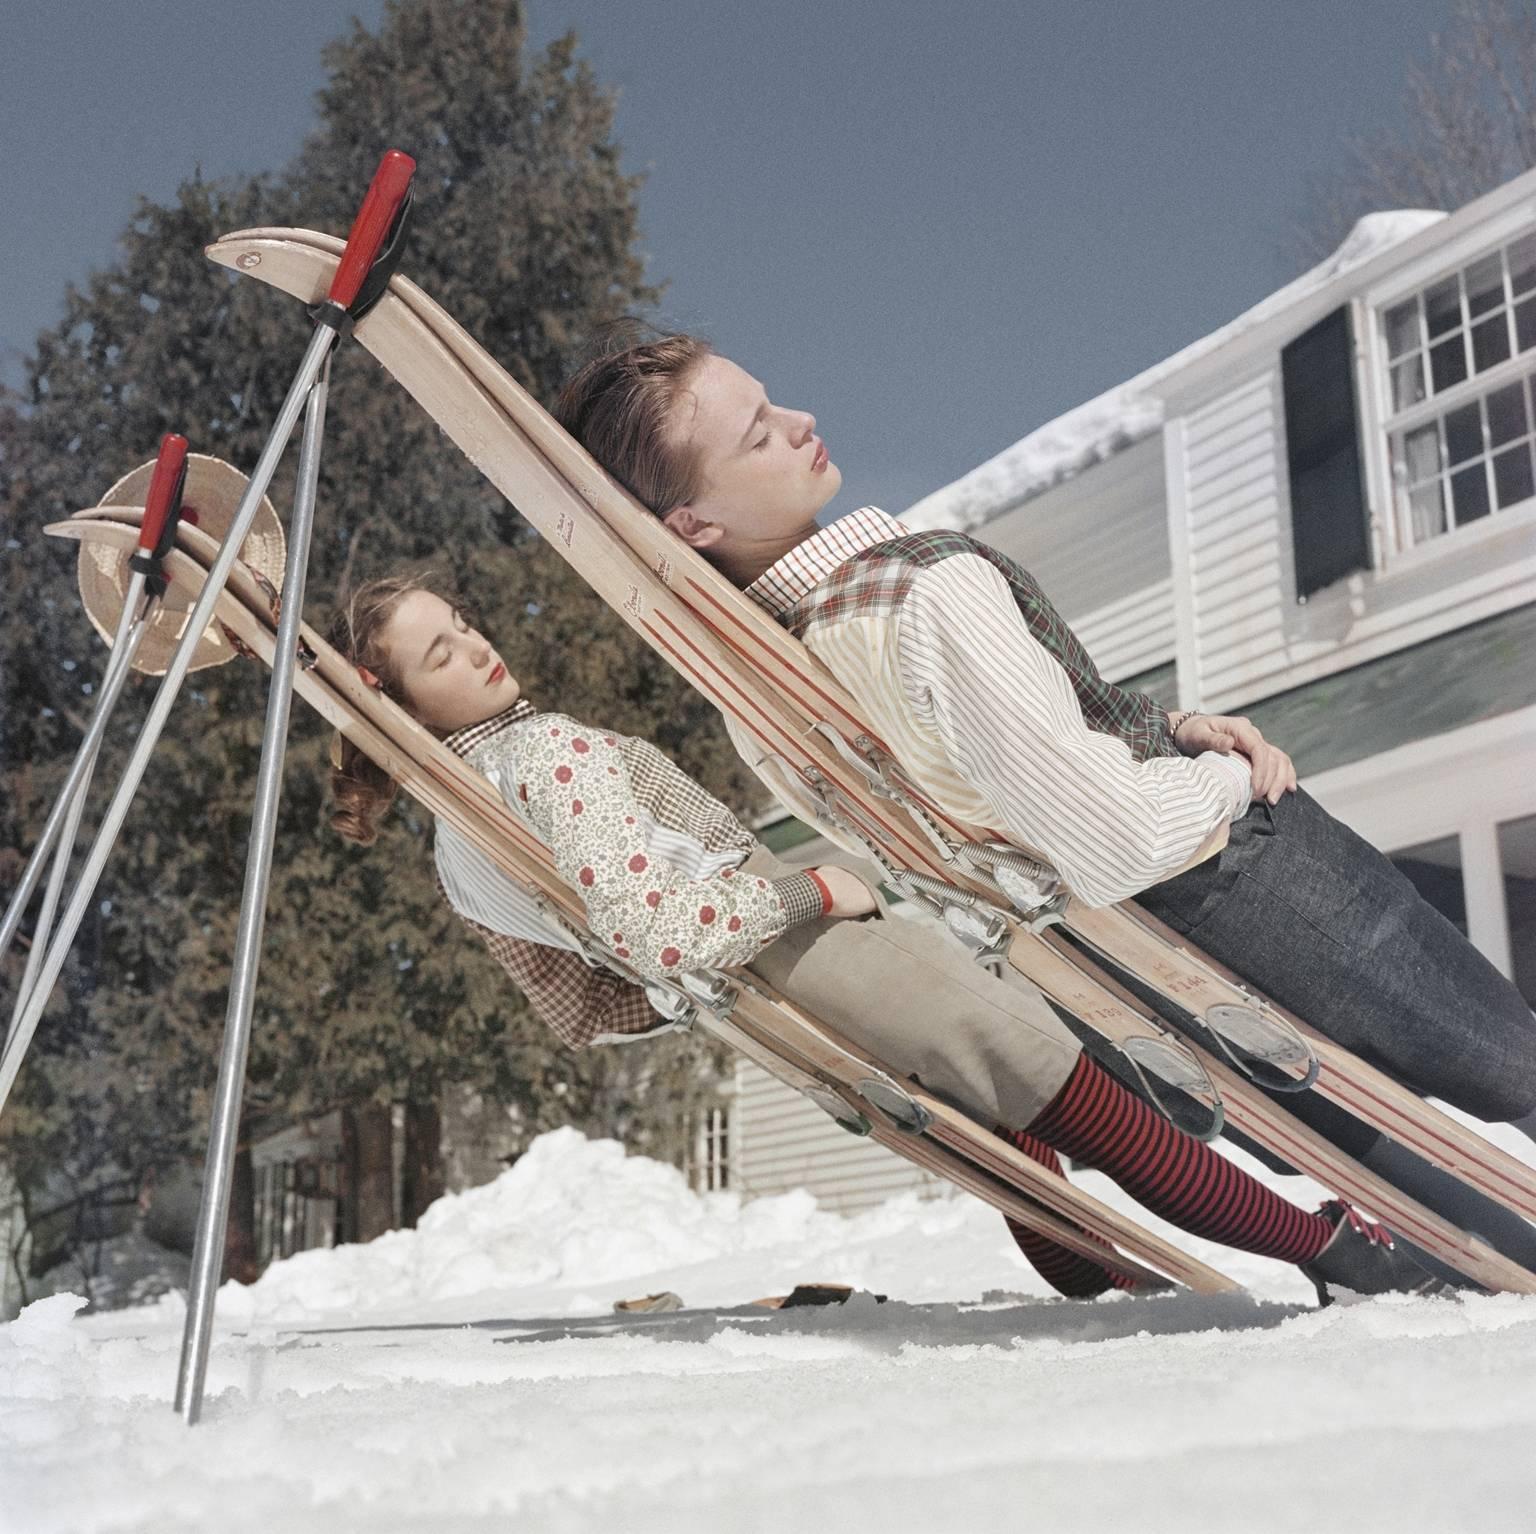 Slim Aarons Figurative Photograph - 'New England Skiing' (Estate Stamped Edition)